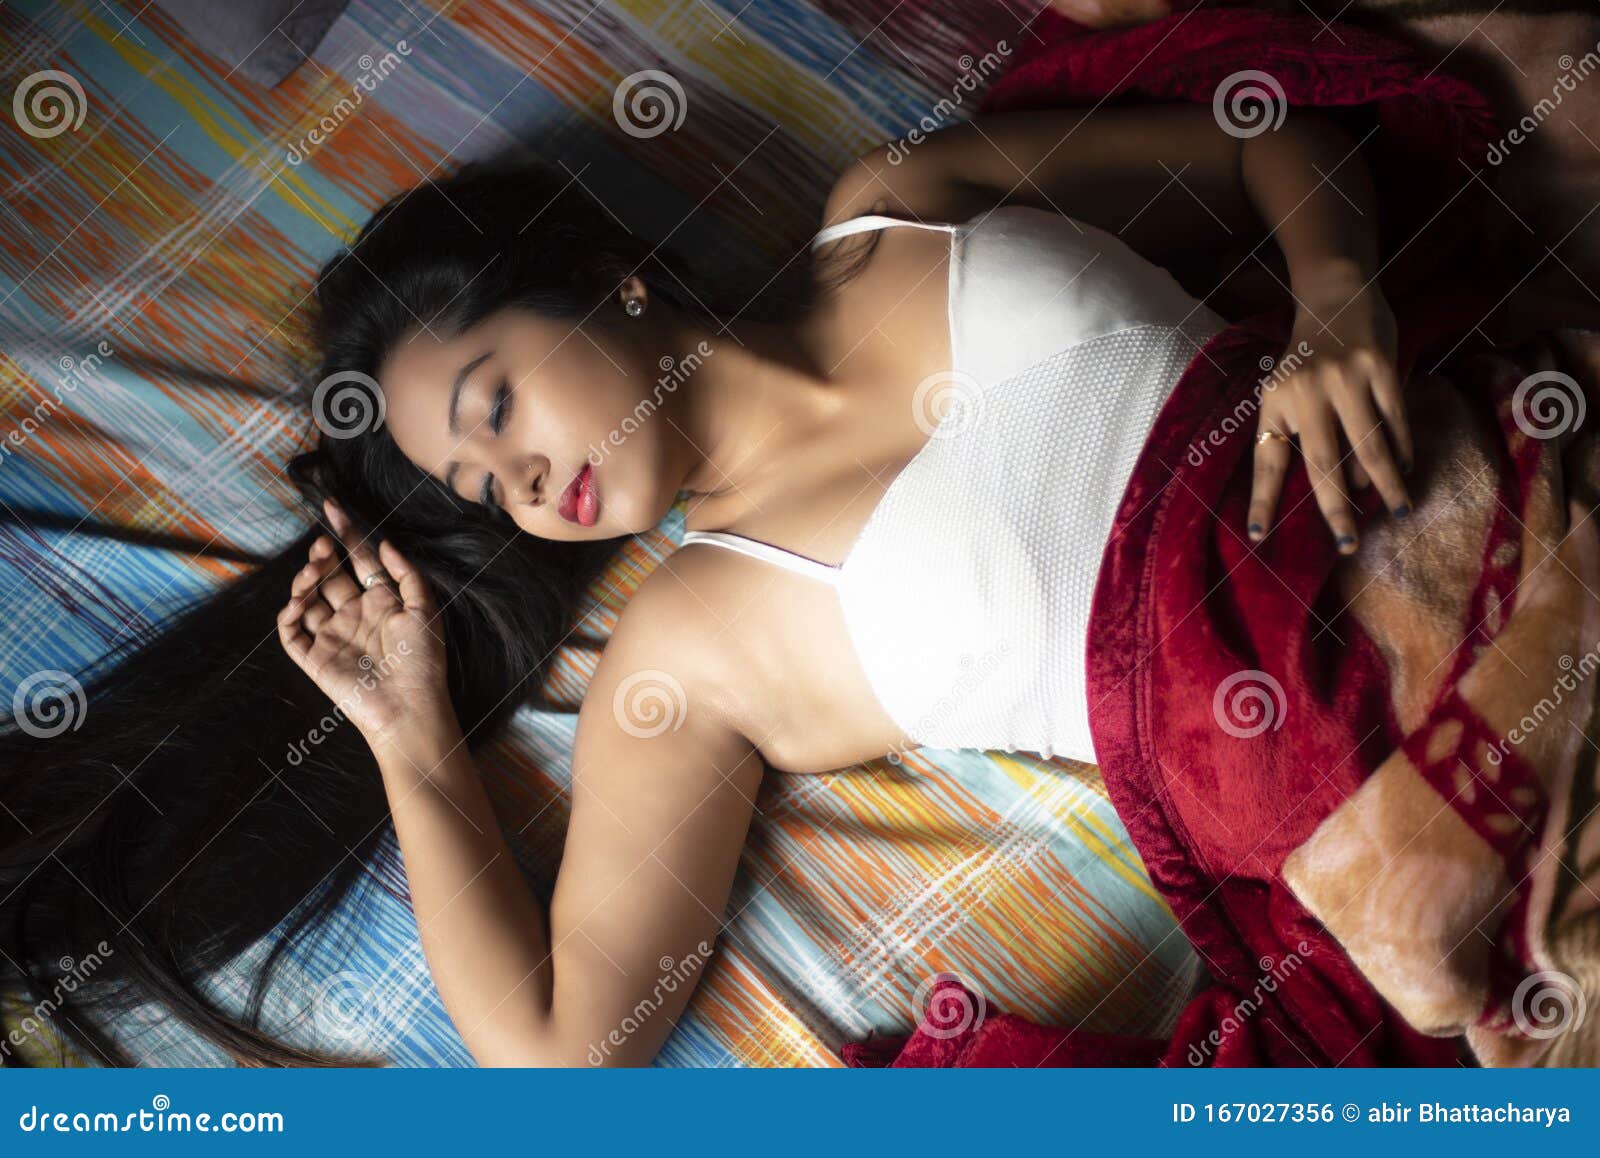 Young Indian Brunette Woman in Sleeping Wear Lying on a Bed Stock Photo -  Image of lifestyle, daydream: 167027356